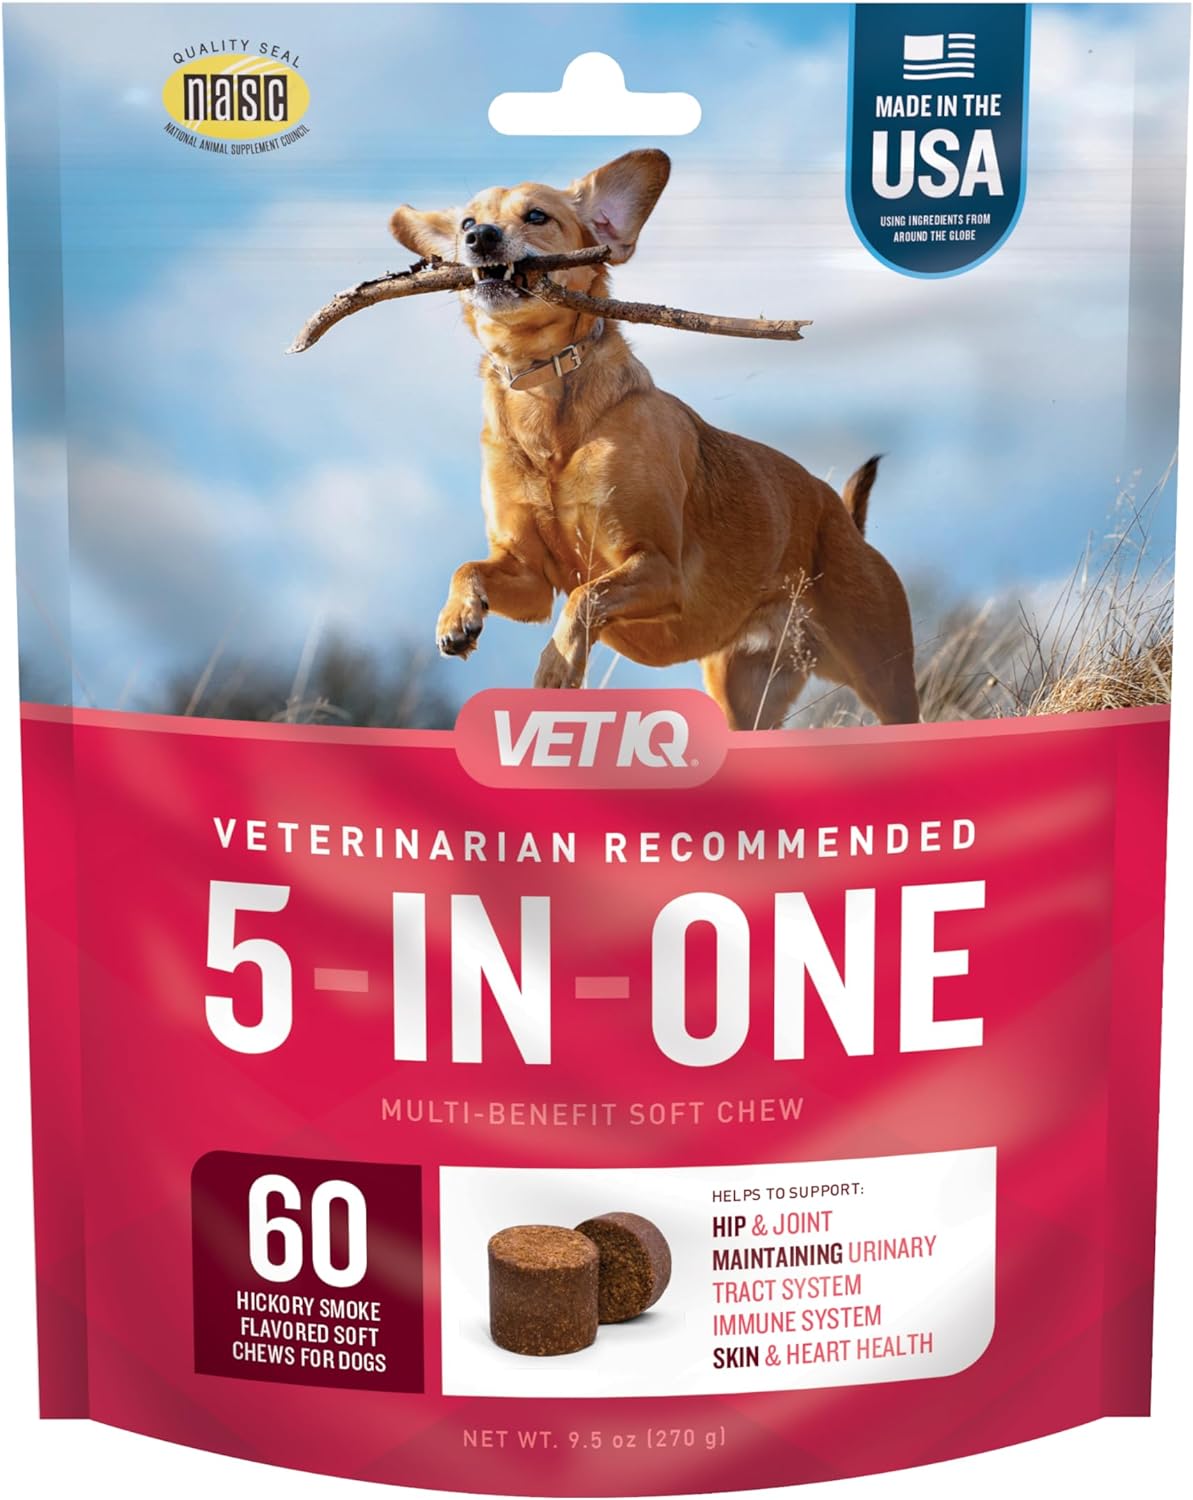 VetIQ 5-in-One Supplement for Dogs, Supports Hip & Joint, Urinary Tract, Immune System, Skin Health and Heart Health, Soft Chews, Made in The USA, 60 Count (Packaging May Vary)